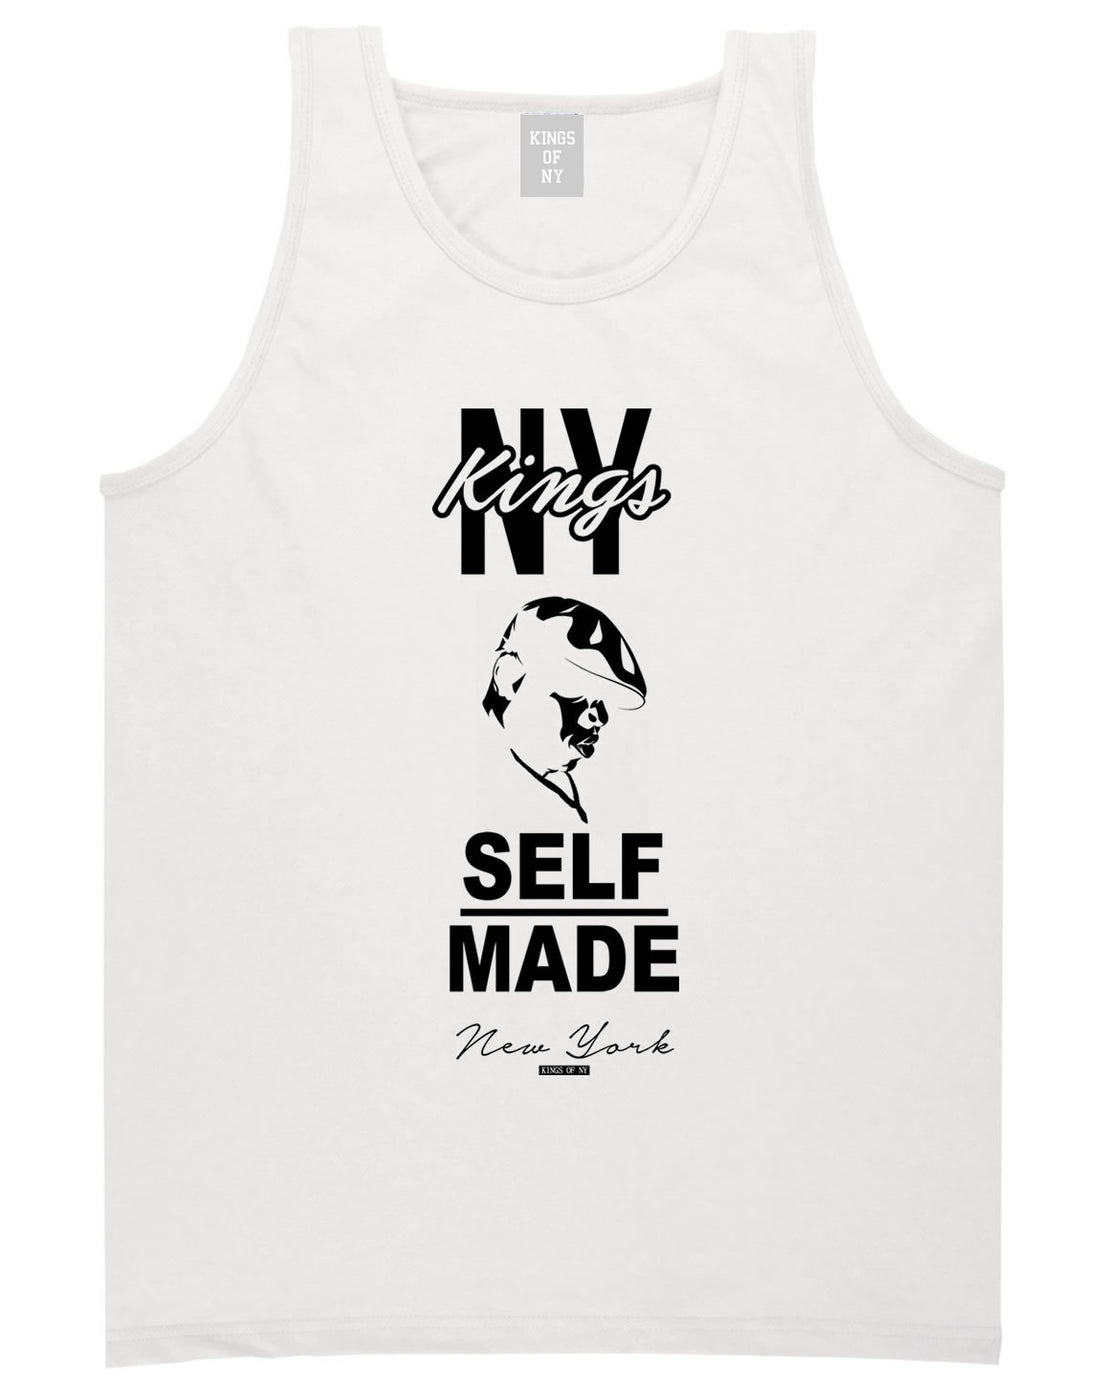 NY Kings Self Made Biggie Tank Top in White By Kings Of NY